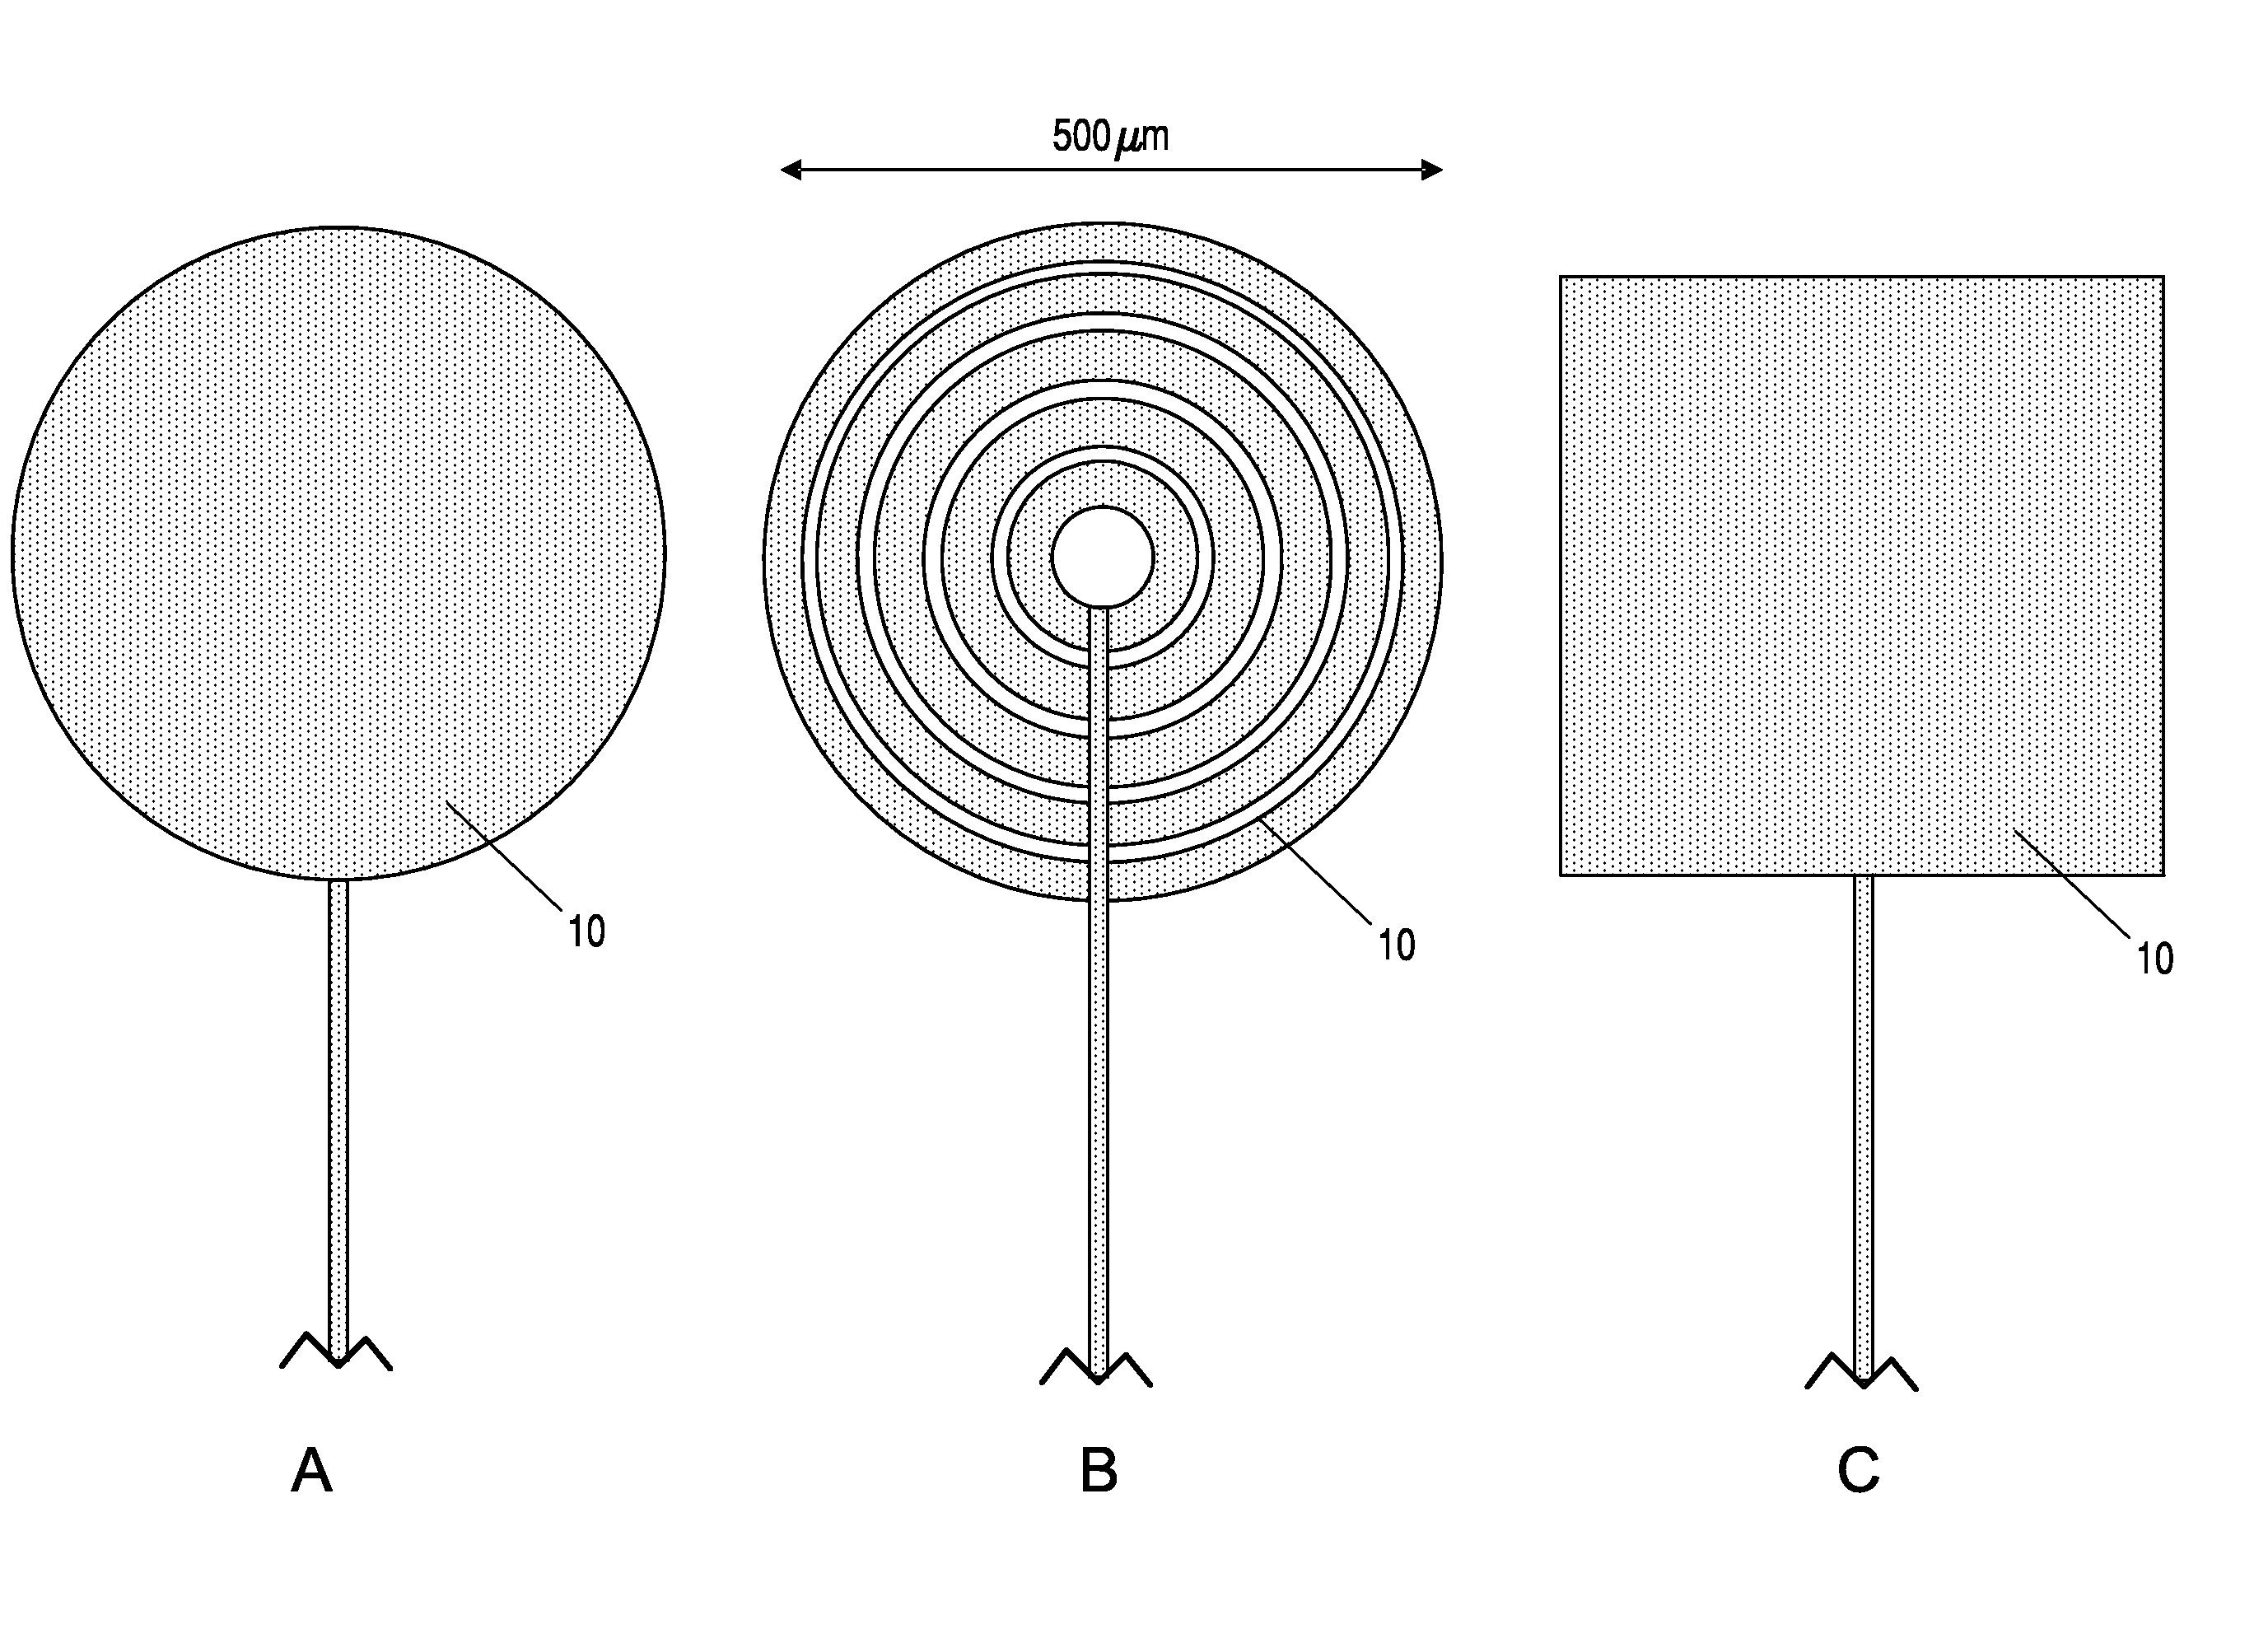 Biosensor structures for improved point of care testing and methods of manufacture thereof